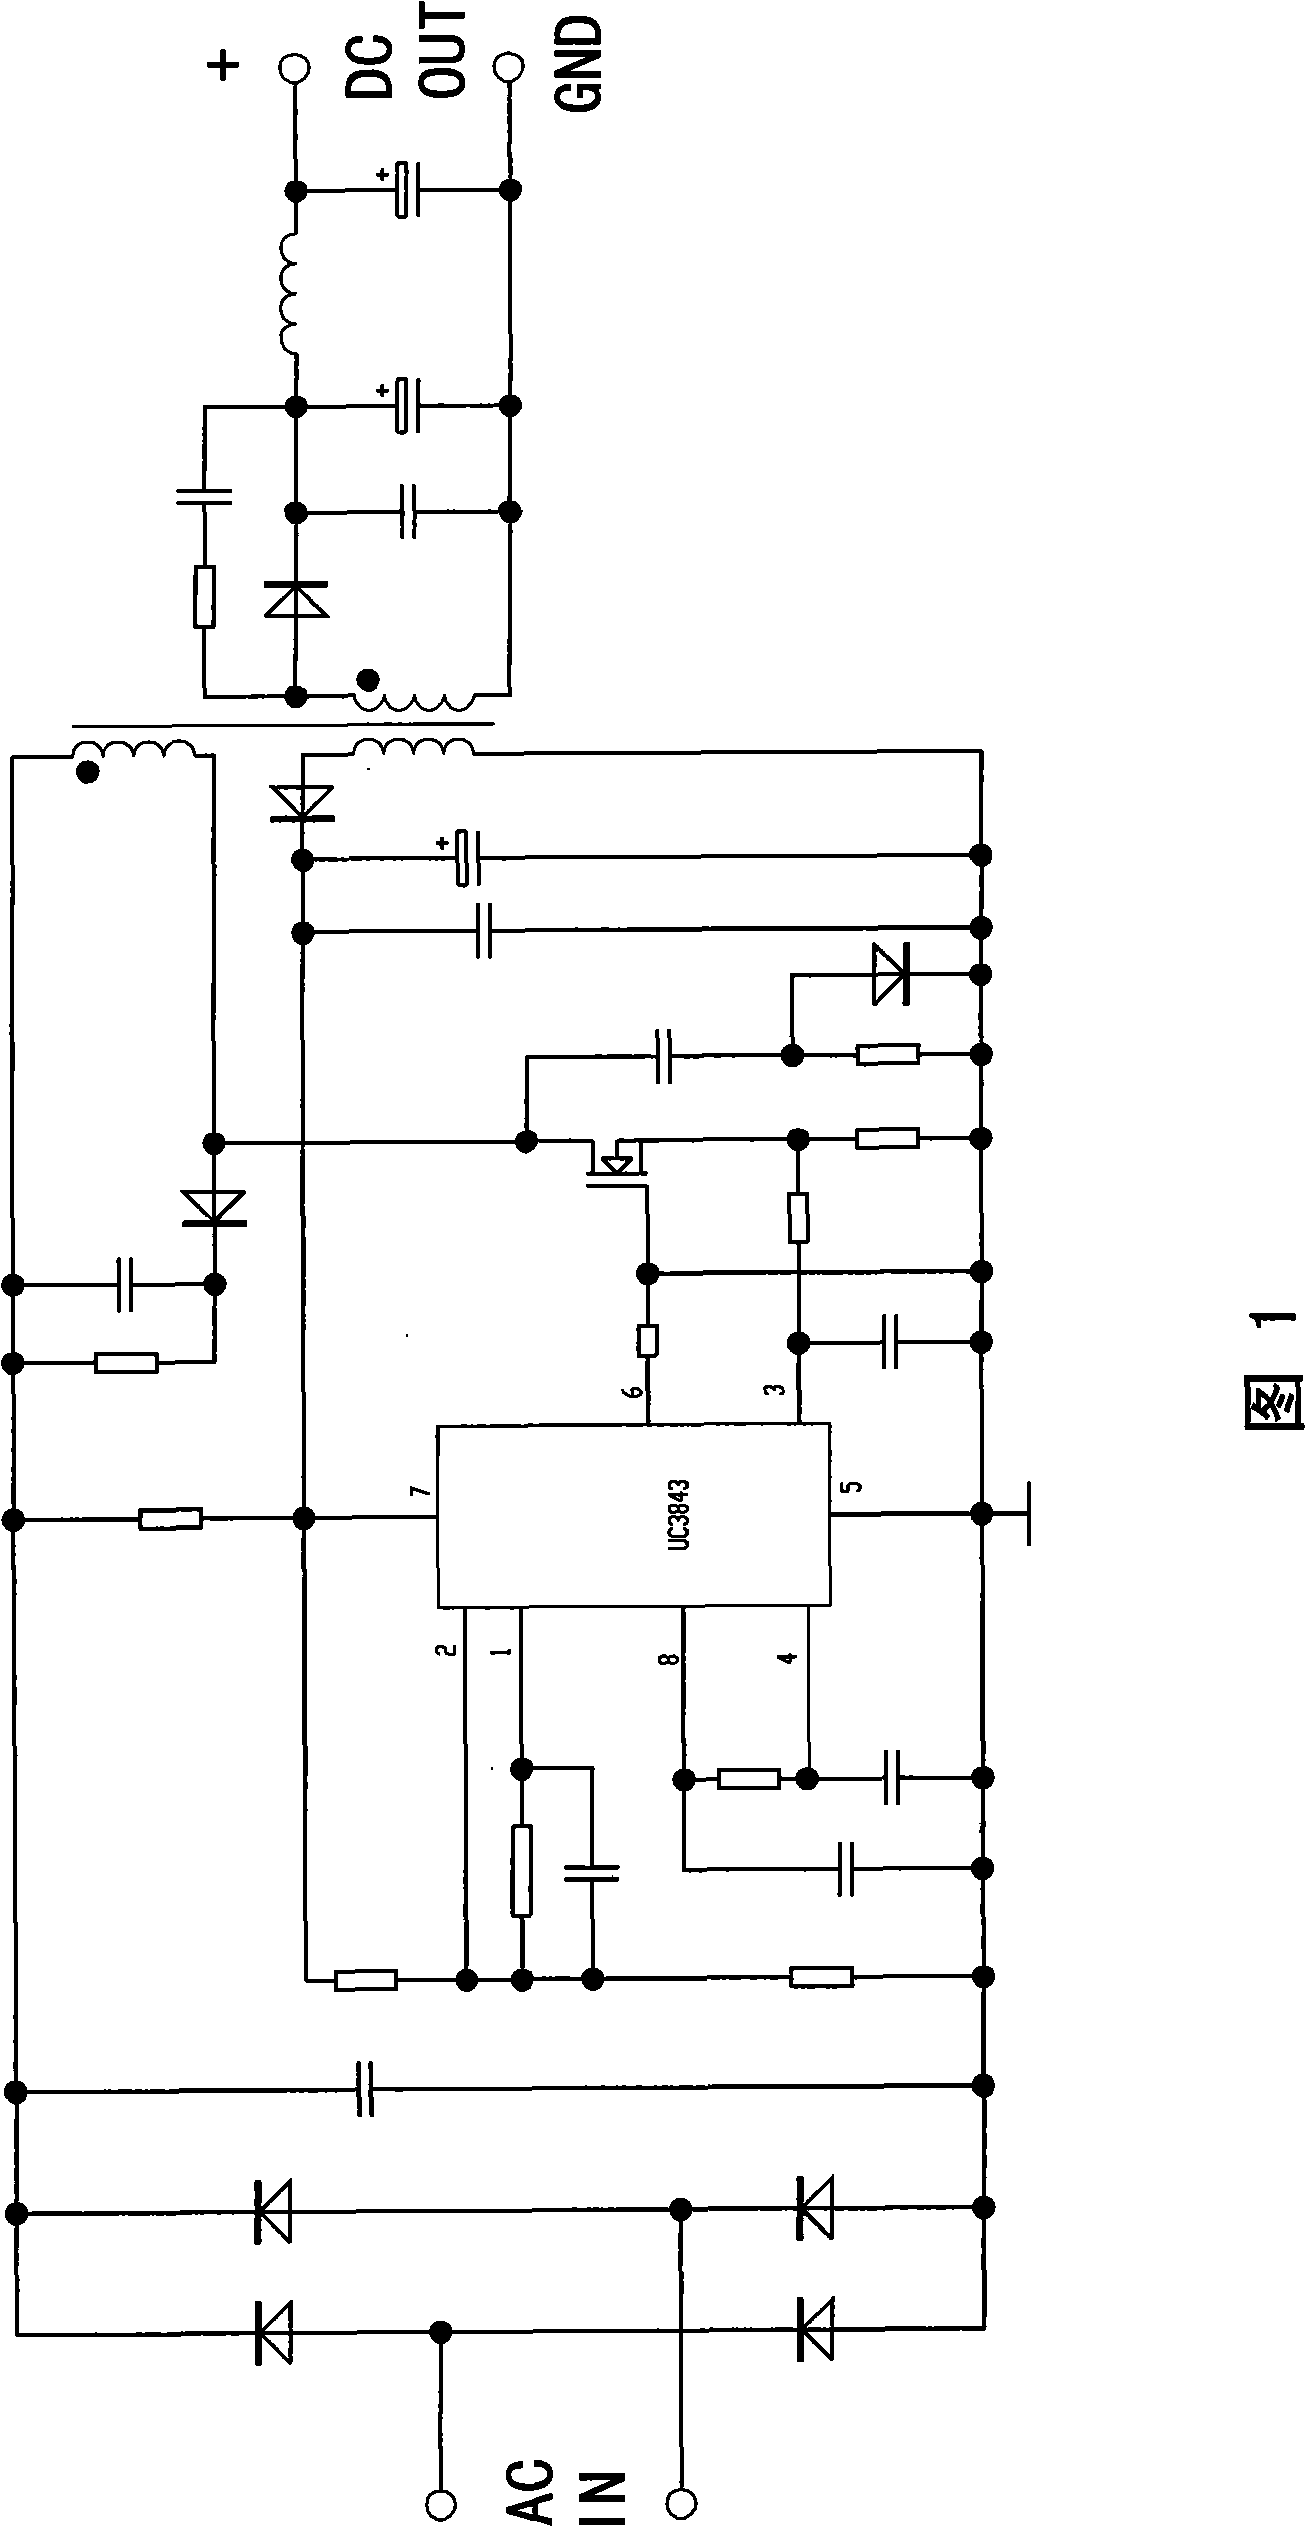 High-power LED lamp circuit with fan